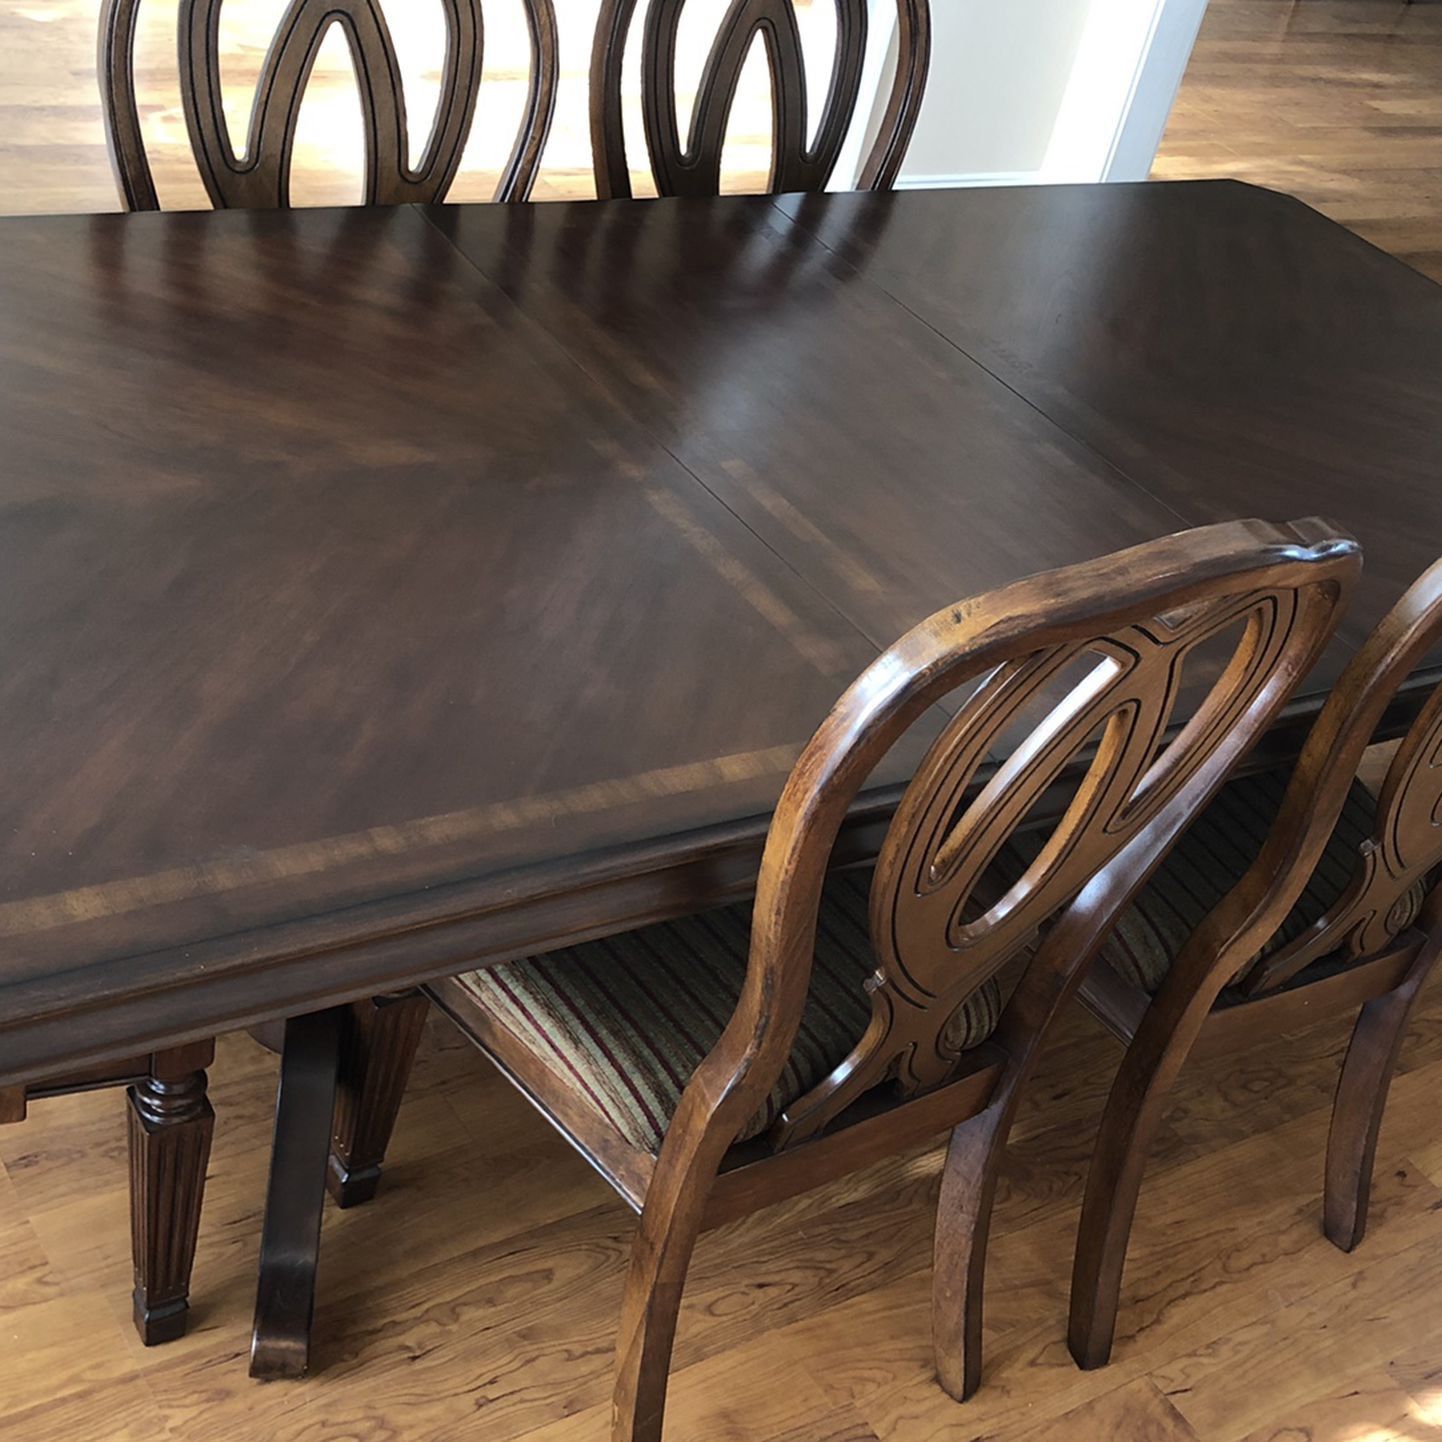 Dining Set / Table With 4 Chairs